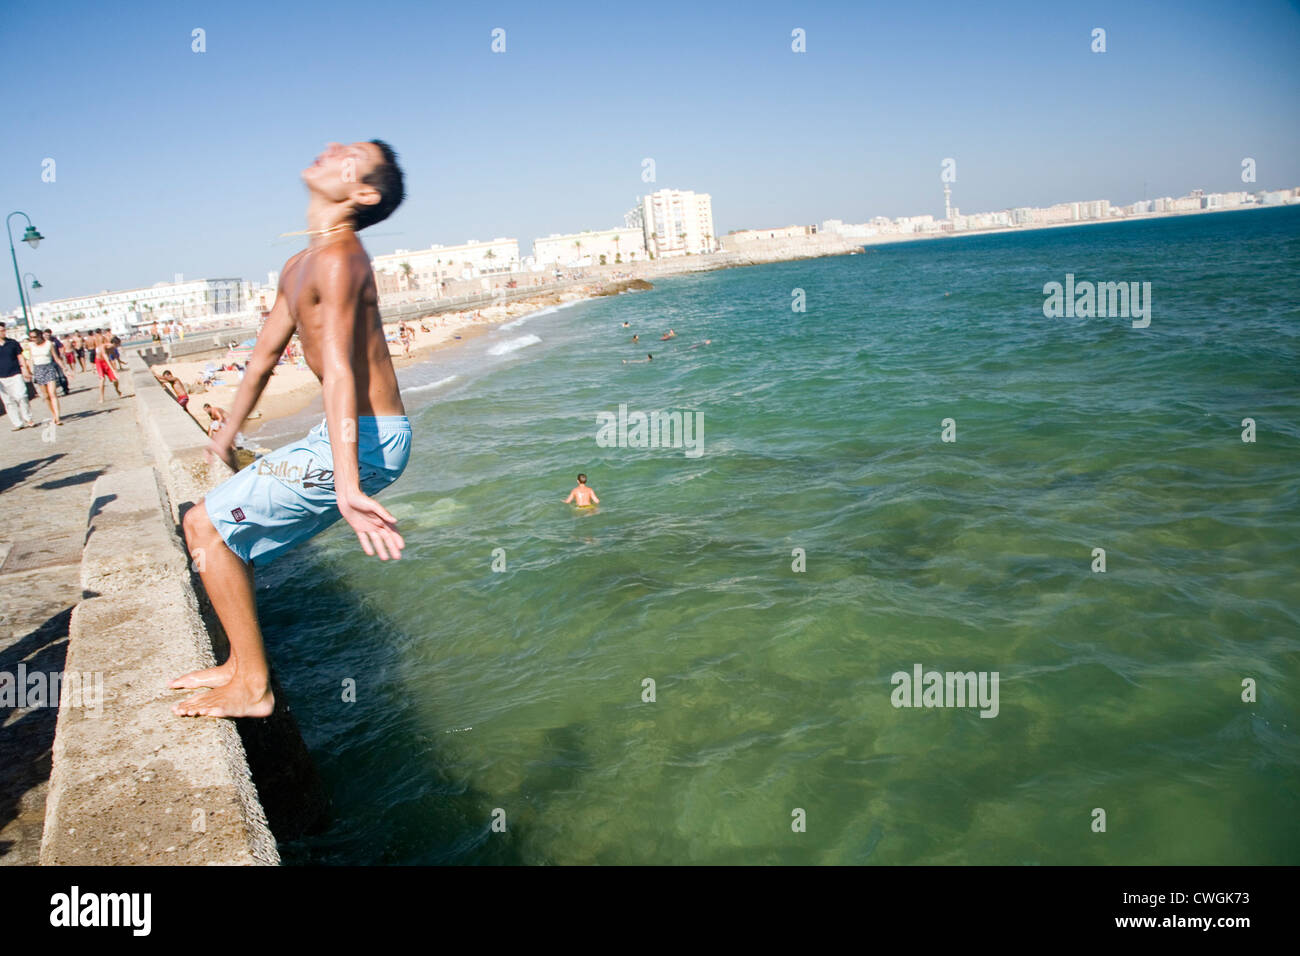 Spain, Cadiz, a boy jumps into the water with a backward somersault Stock Photo